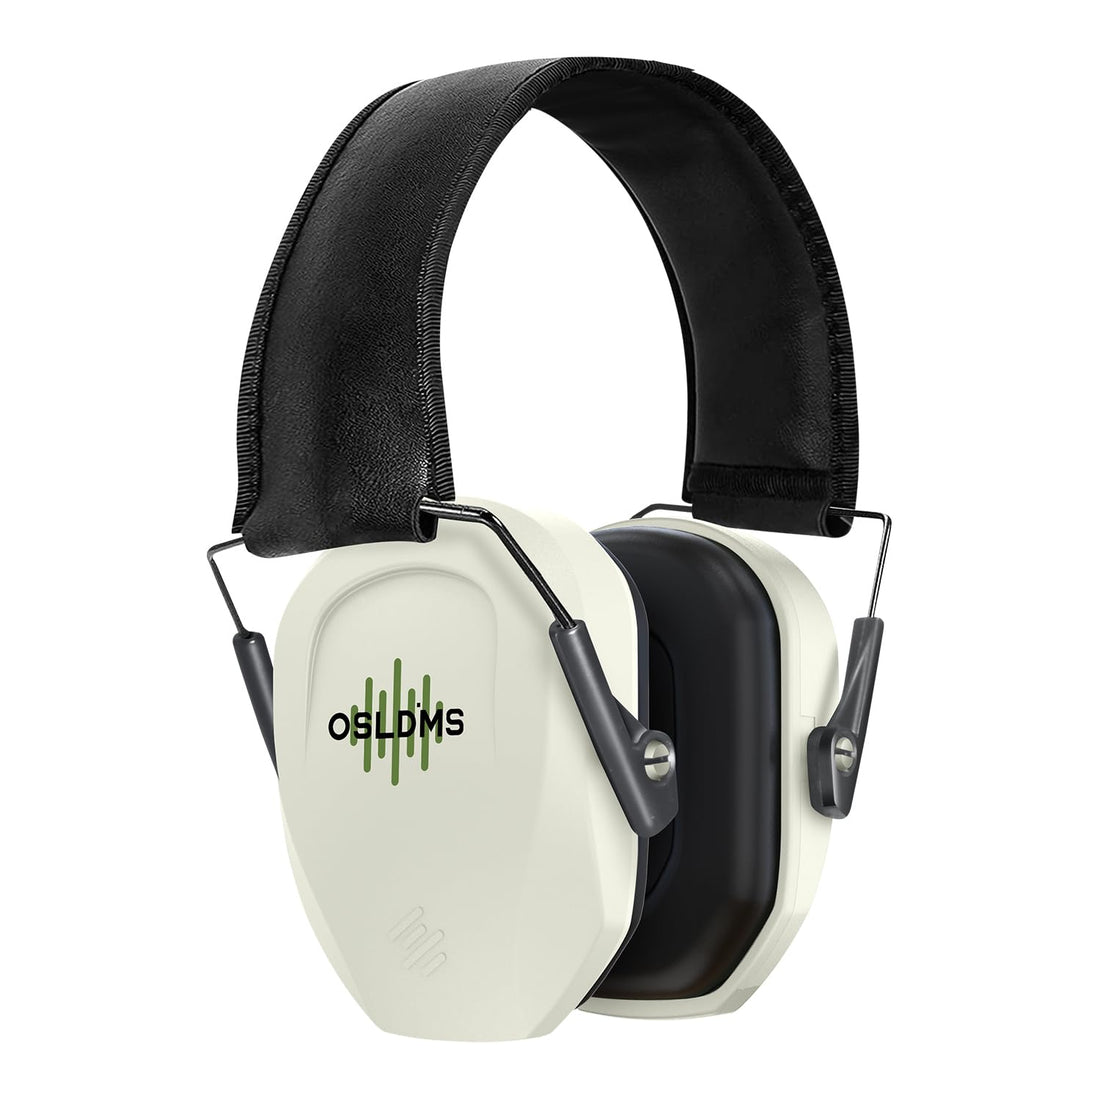 Osldims Shooting Ear Protection, Compact Foldable and NRR 34dB Maximum Hearing Protection Earmuffs,for shooting,hunting